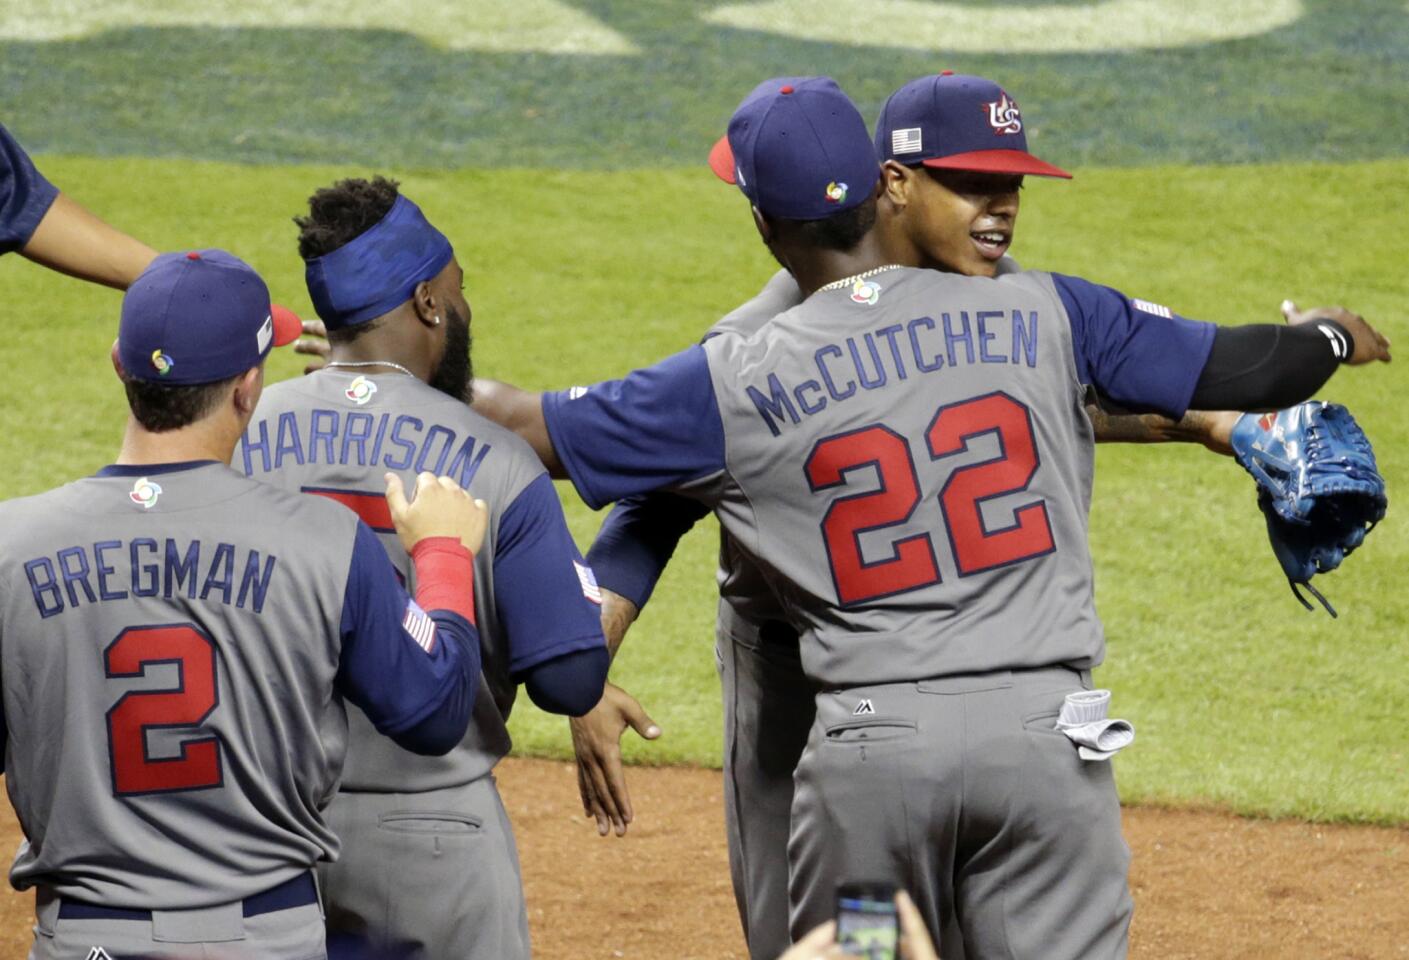 U.S. starting pitcher Marcus Stroman, right rear, is hugged by outfielder Andrew McCutchen (22) after being relieved during the sixth inning against the Dominican Republic in a first-round game of the World Baseball Classic, Saturday, March 11, 2017, in Miami. (AP Photo/Lynne Sladky)